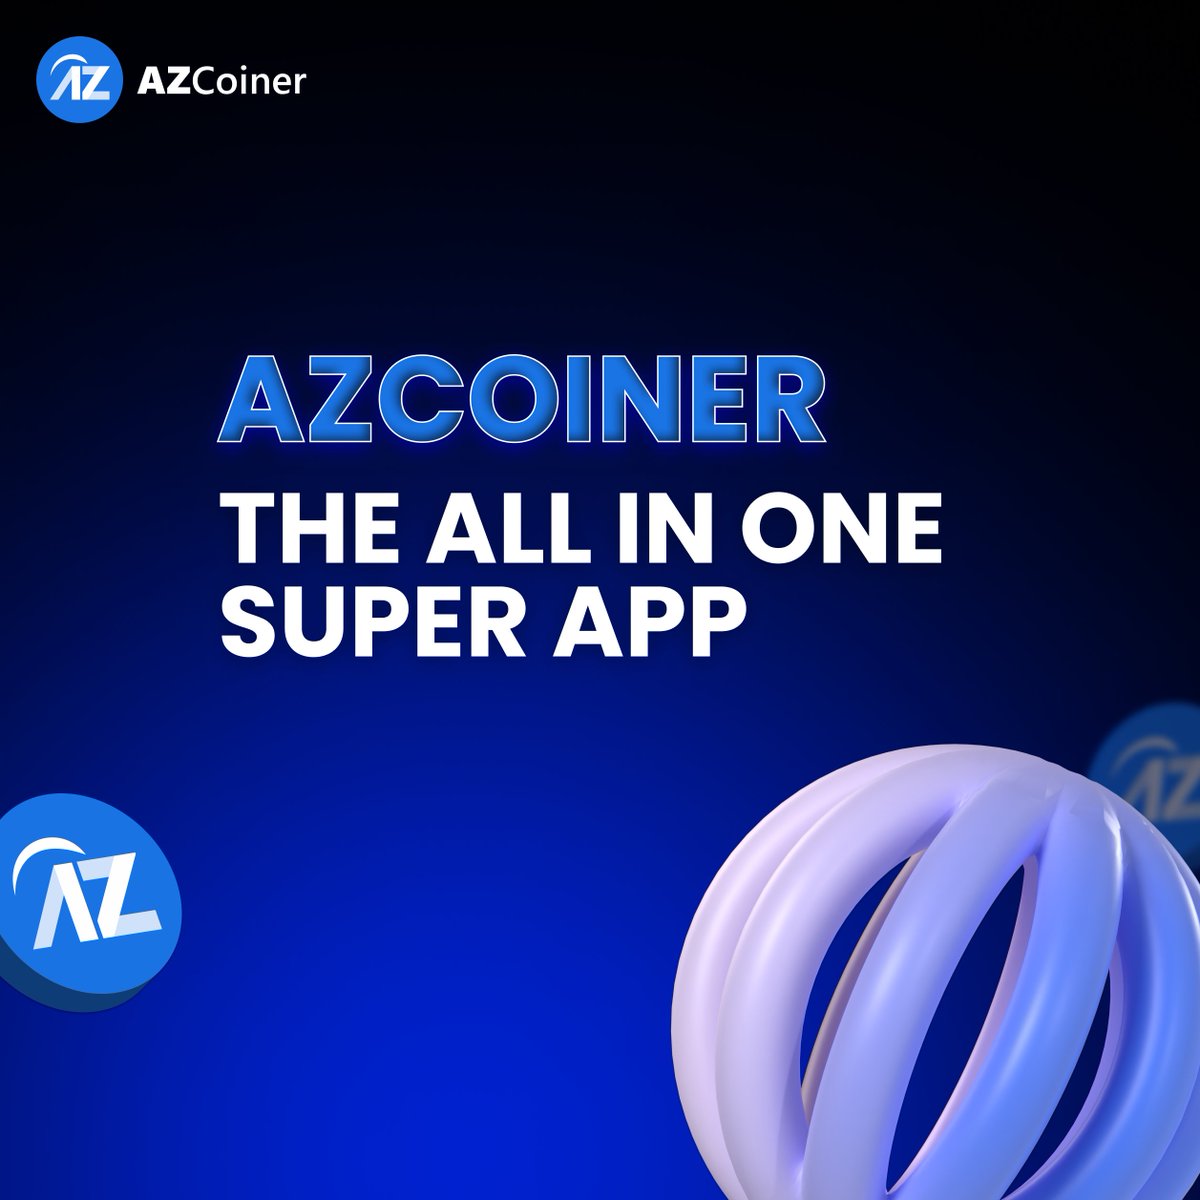 💬 𝐇𝐞𝐲 𝐀𝐙𝐂𝐨𝐢𝐧𝐞𝐫 𝐜𝐫𝐞𝐰! Have you tried AZCoiner Wallet to connect to the web3 world yet? AZCoiner Web3 Wallet— the key 🔑unlocks the potential of web3 for storing, managing, and interacting with crypto, NFTs, and decentralized apps. 📥 If you need guidance…